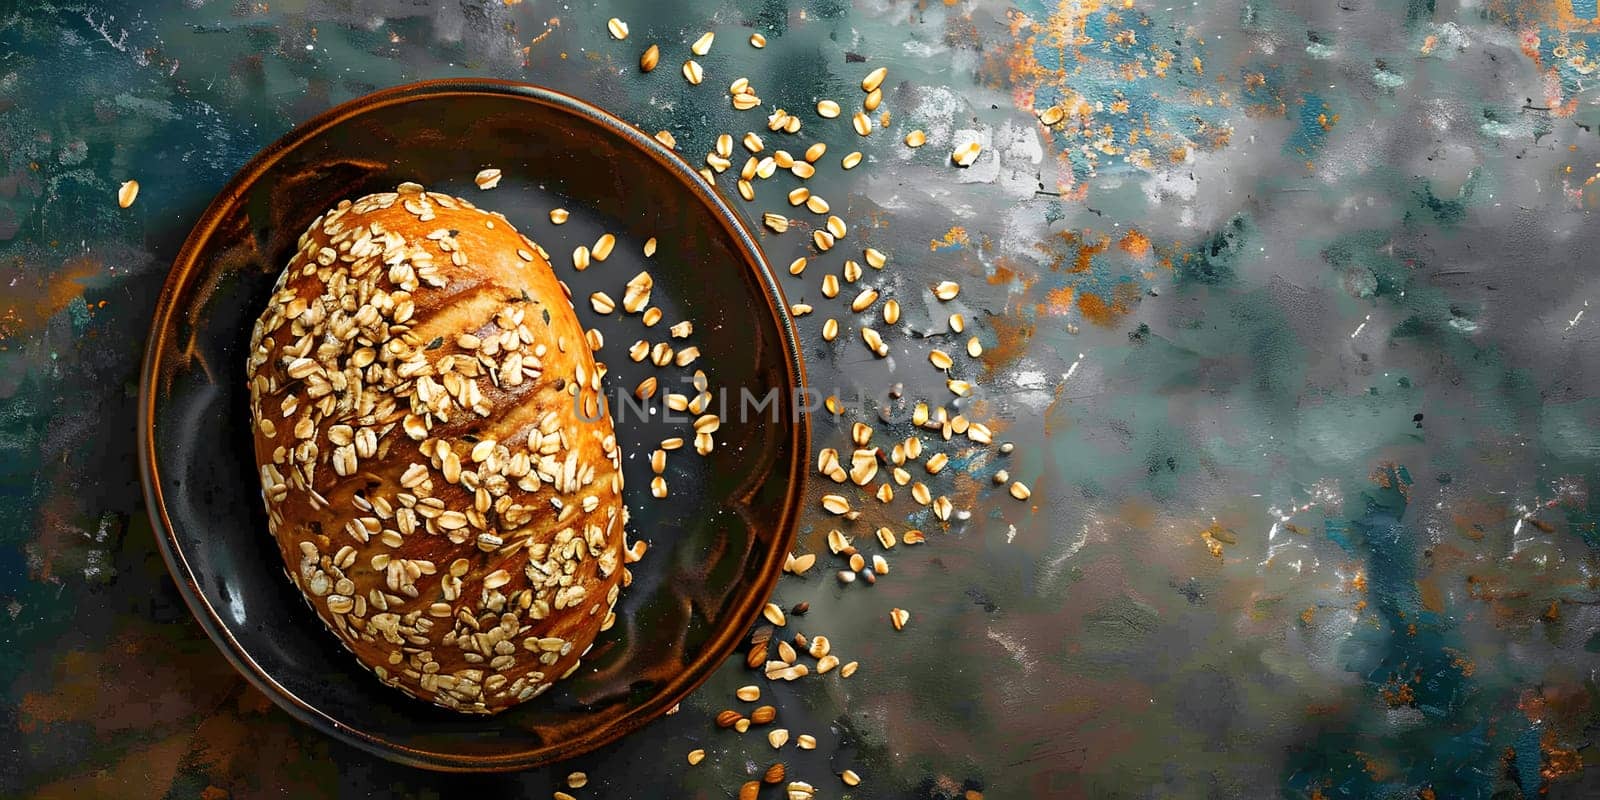 A loaf of sesame seed bread sits on a plate on a wooden table. The circular plate contrasts the texture of the seeds, creating a visually appealing display of food